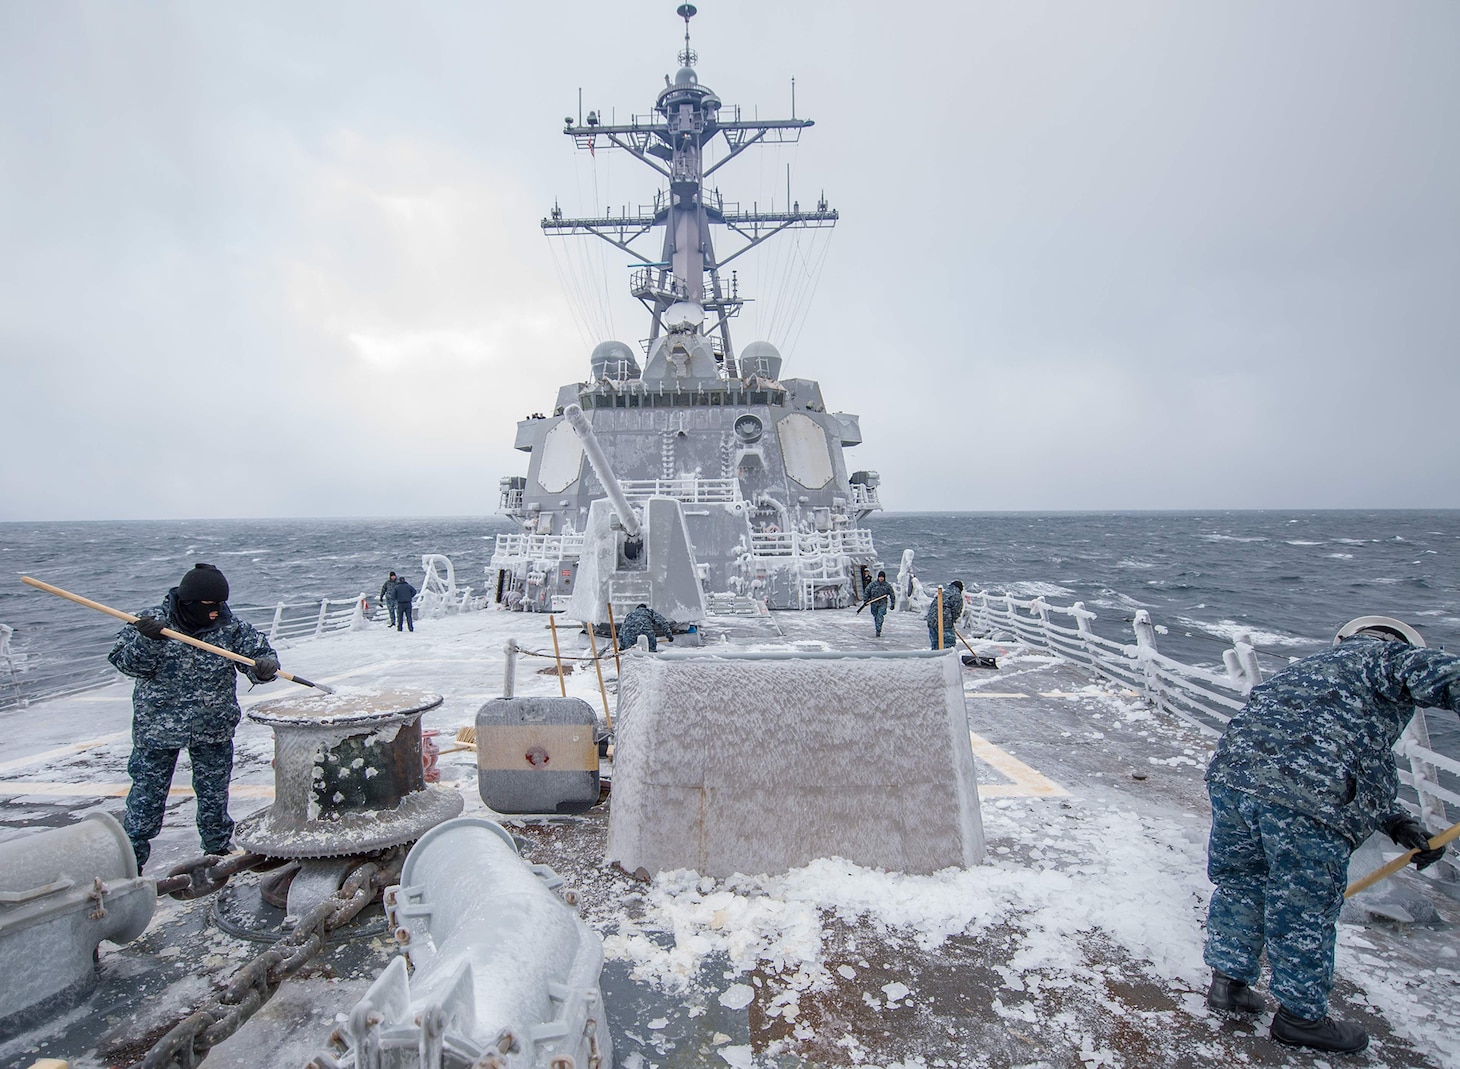 Sailors assigned to the forward-deployed Arleigh Burke-class guided-missile destroyer USS McCampbell (DDG 85) clear the ship’s forecastle of snow and ice, Feb. 3, 2017. McCampbell is on patrol in the 7th Fleet area of operations in support of security and stability in the Indo-Asia-Pacific region.